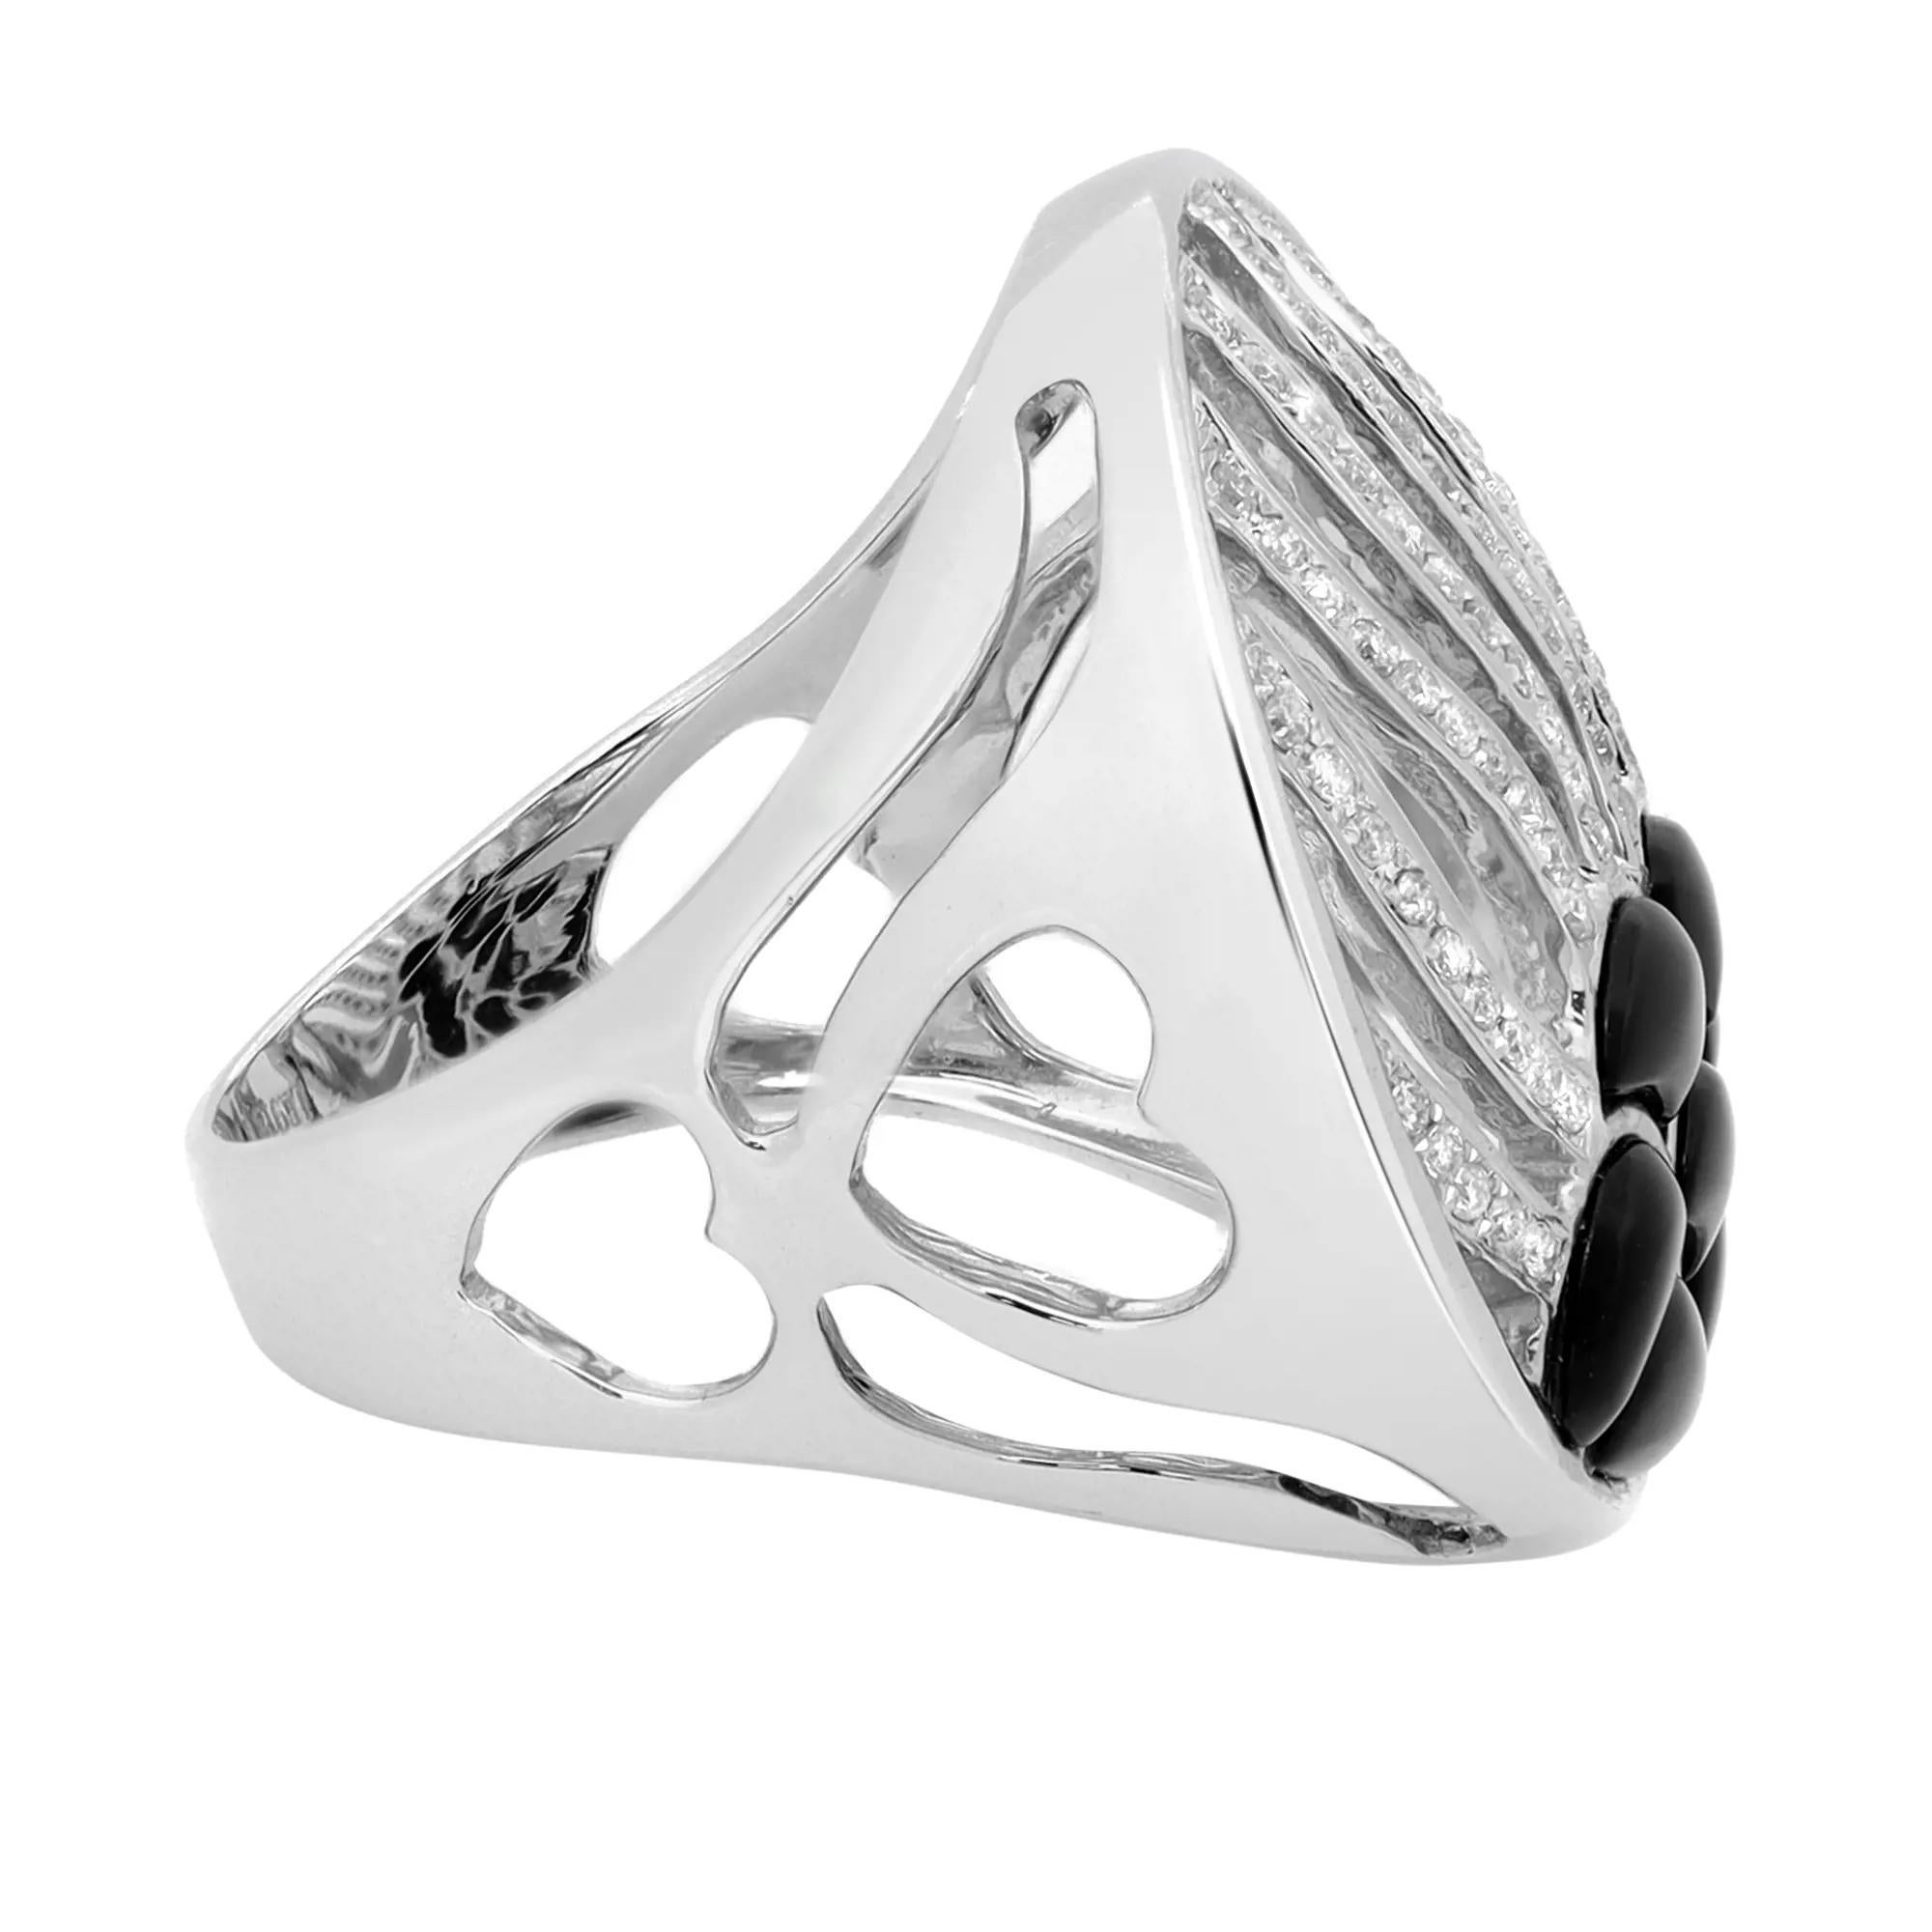 This bold and beautiful ring features pave set round cut diamonds set in a wave pattern with black onyx. Total diamond weight: 0.36 carat. Diamond color I and SI1 clarity. Crafted in brightly polished 14k white gold. The ring size is 7.5 and the